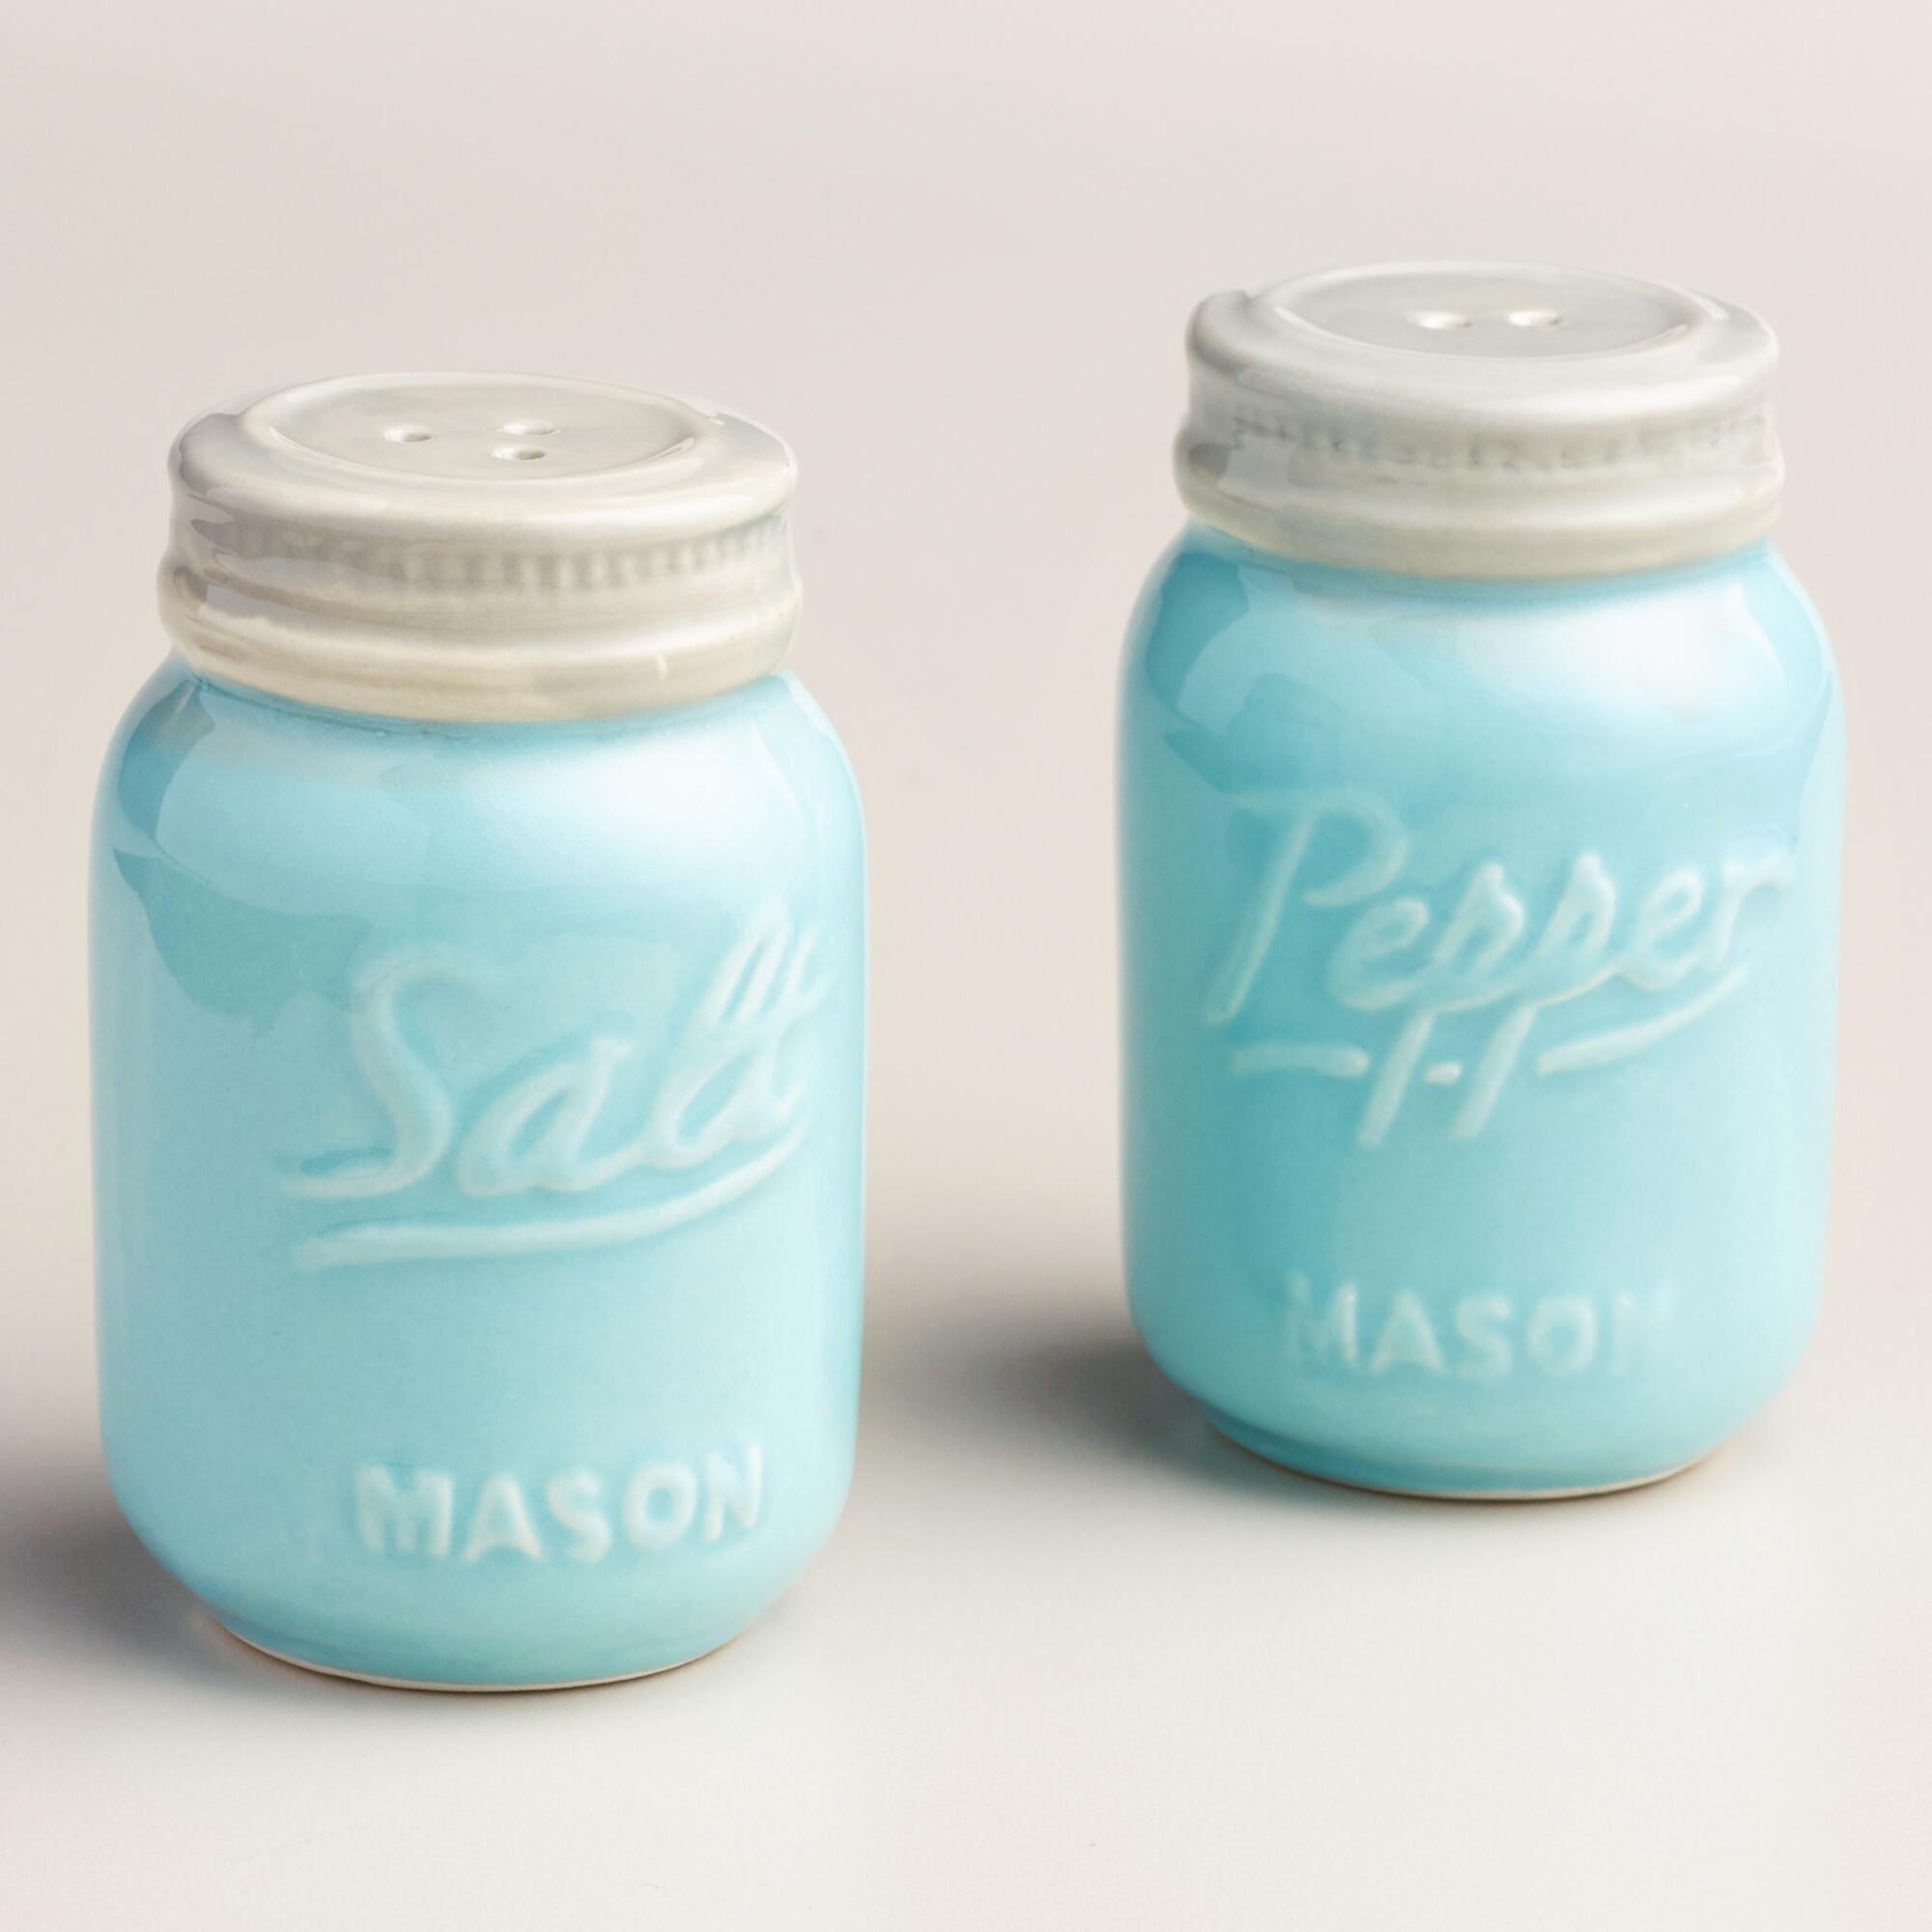 Mason Jar Salt & Pepper Shakers |Ultimate Gift Guide for Mason Jar Lovers | The Everyday Home